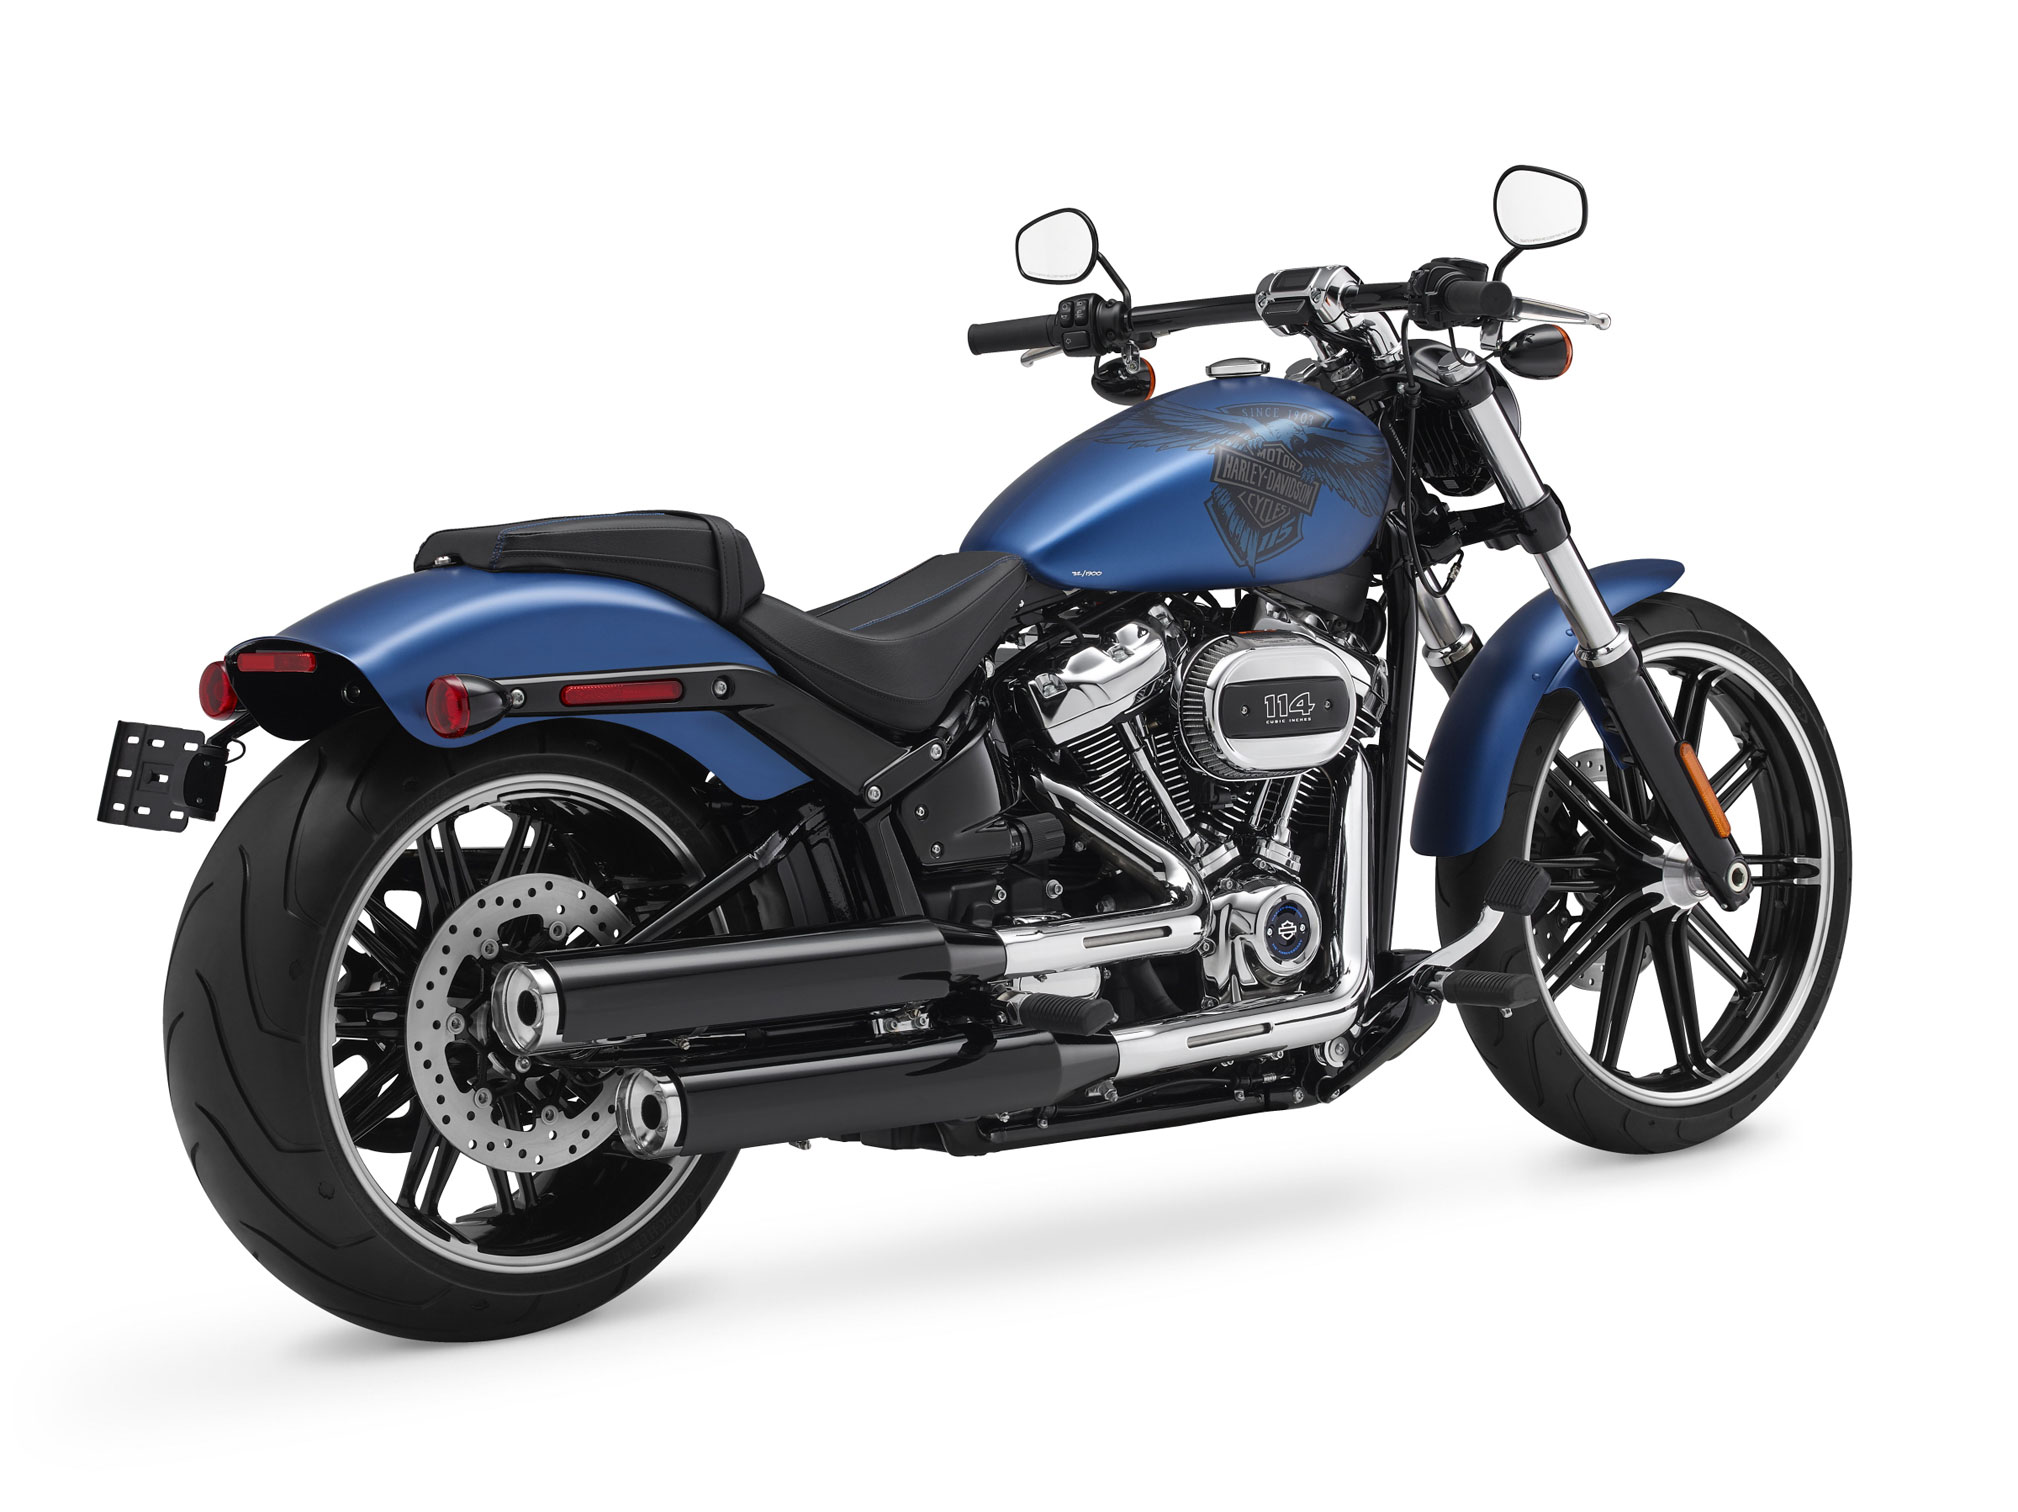 2018 Harley Davidson Breakout 114 115th Anniversary Review Total Motorcycle